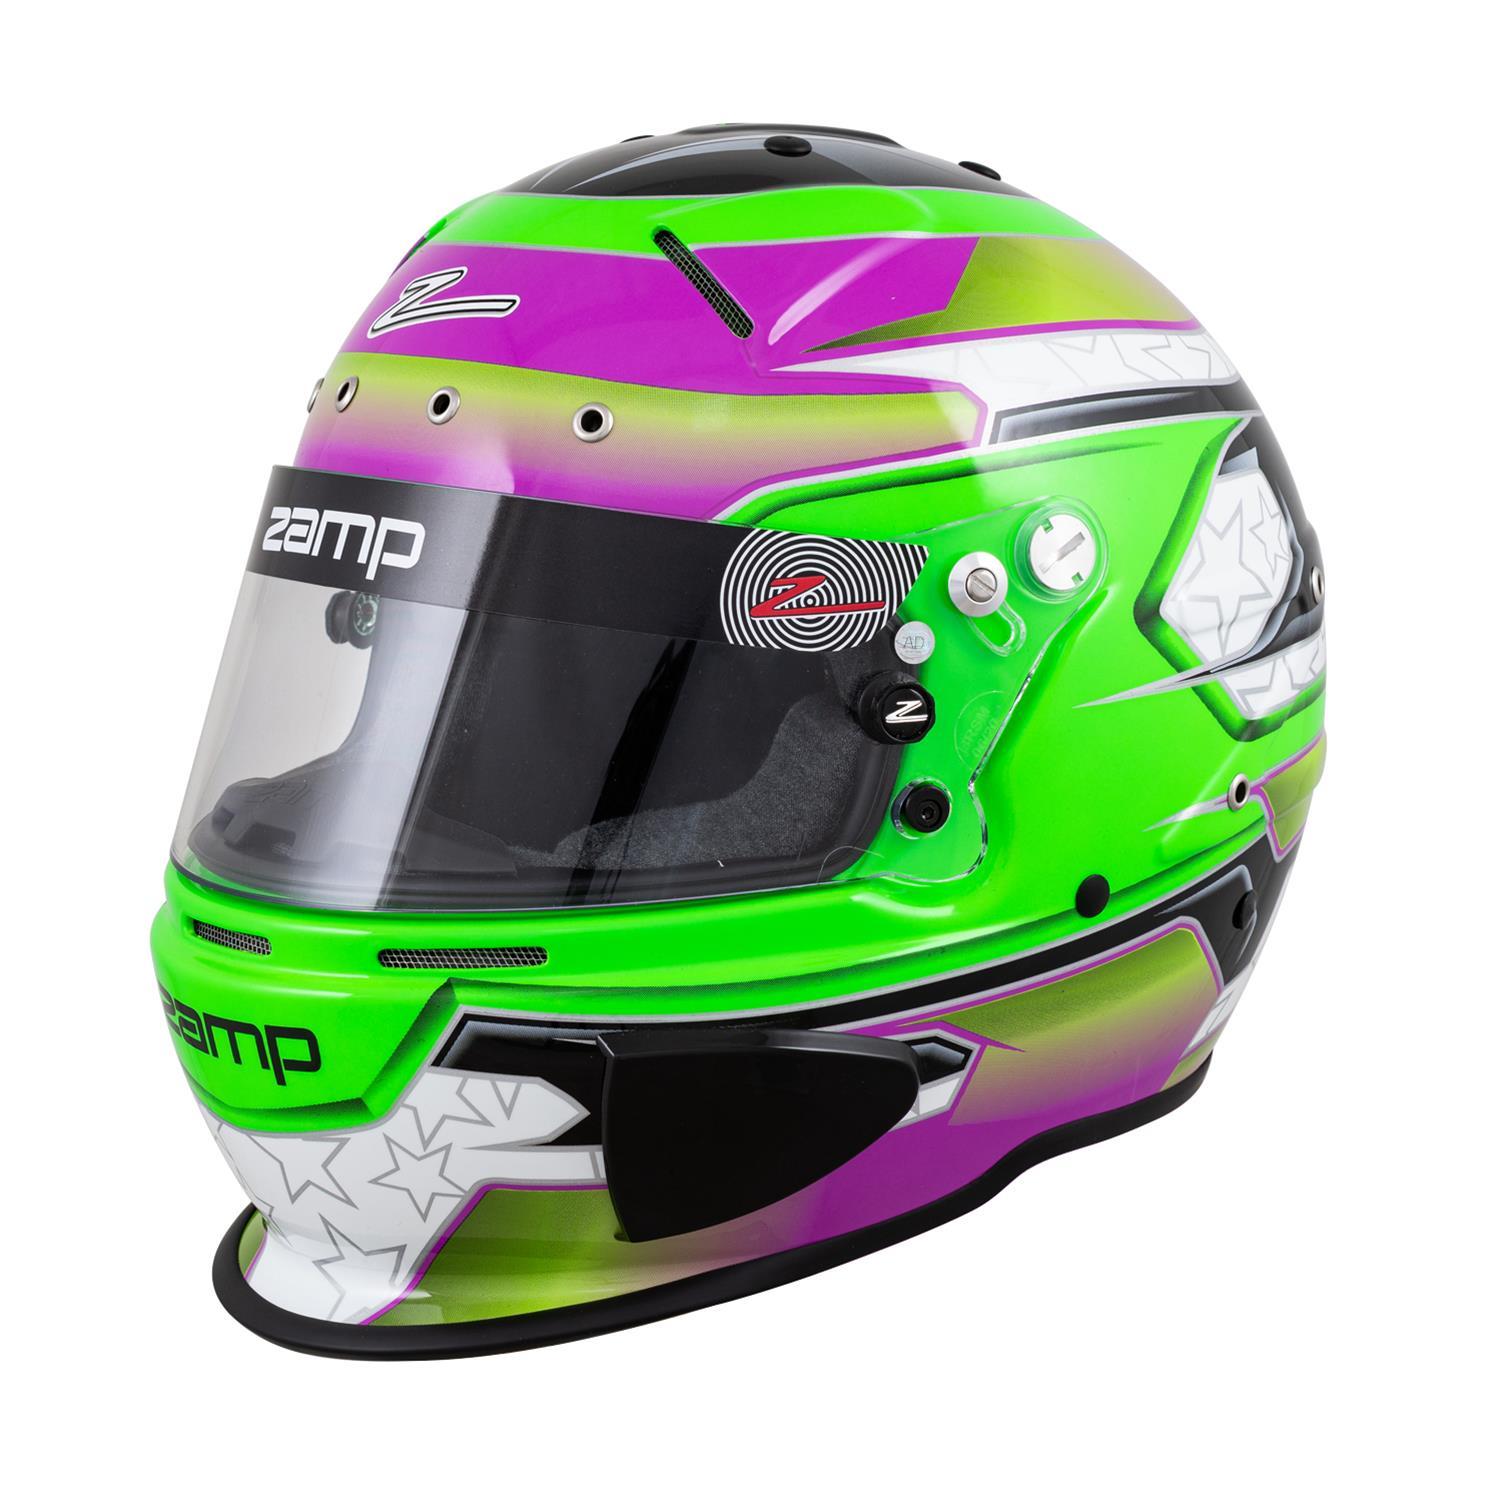 Zamp Racing H760C39M Helmet, RZ-70E Switch, Snell SA2020, FIA Approved, Head and Neck Support Ready, Gloss Green / Purple, Medium, Each